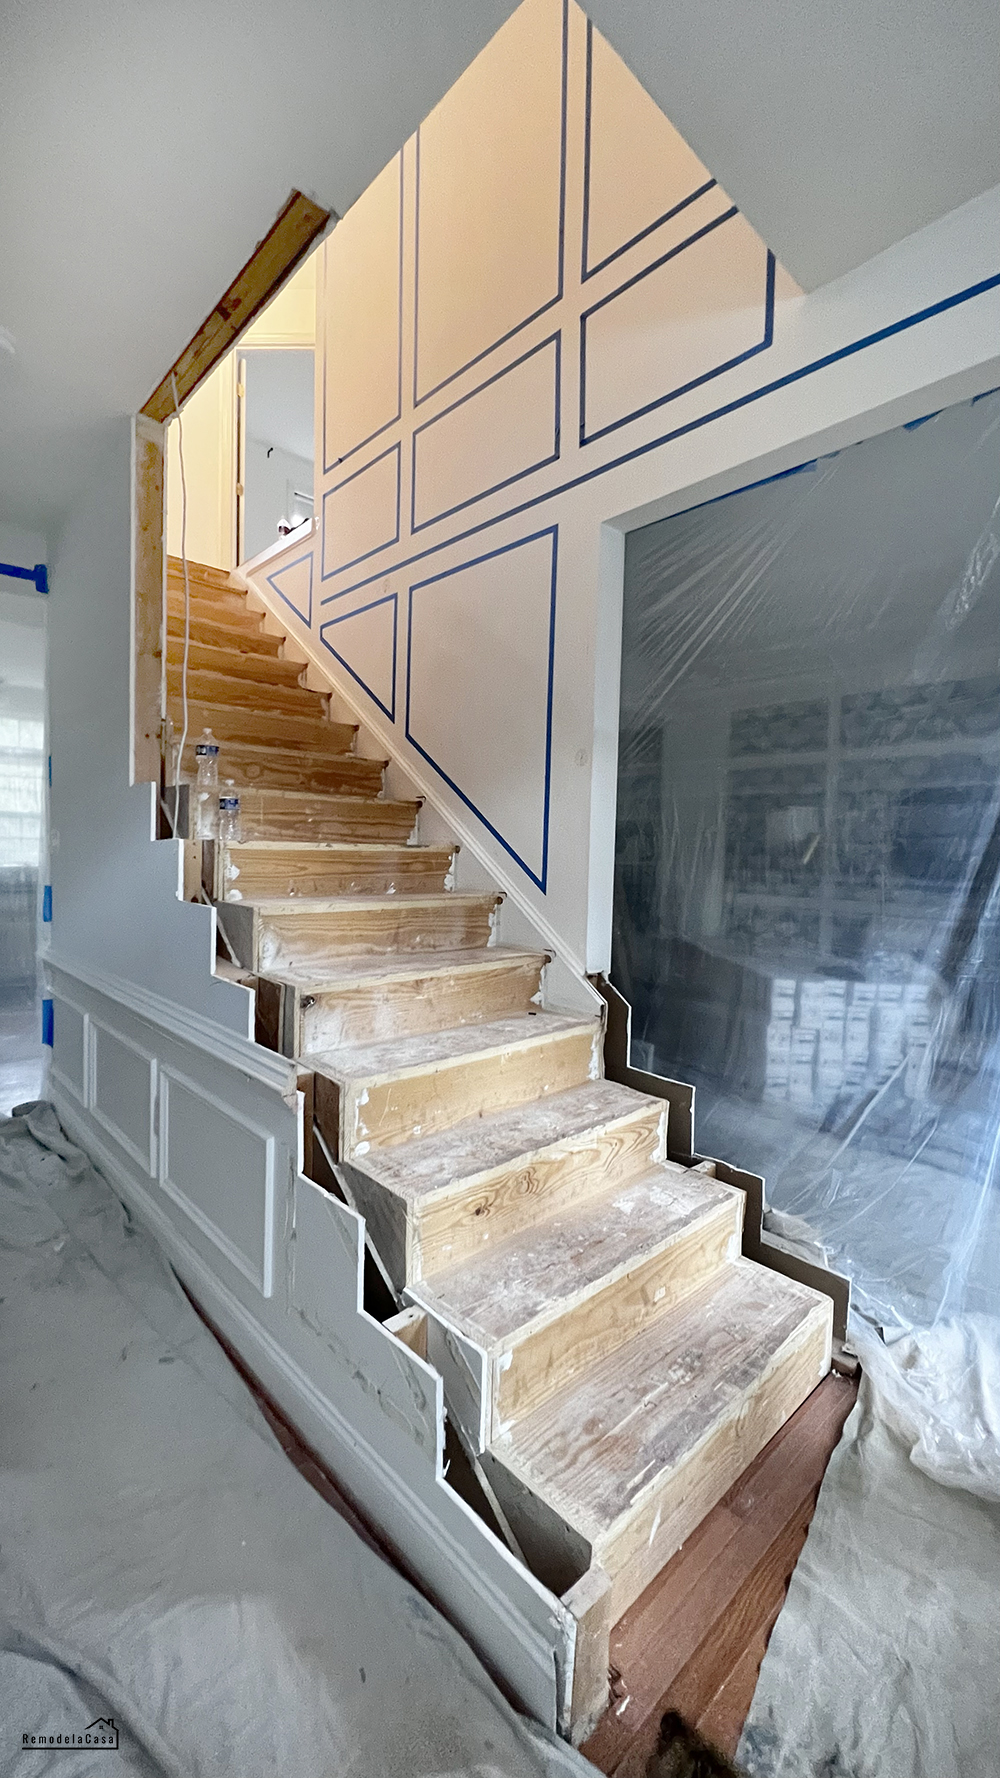 A modern staircase transformation with white oak and square iron balusters